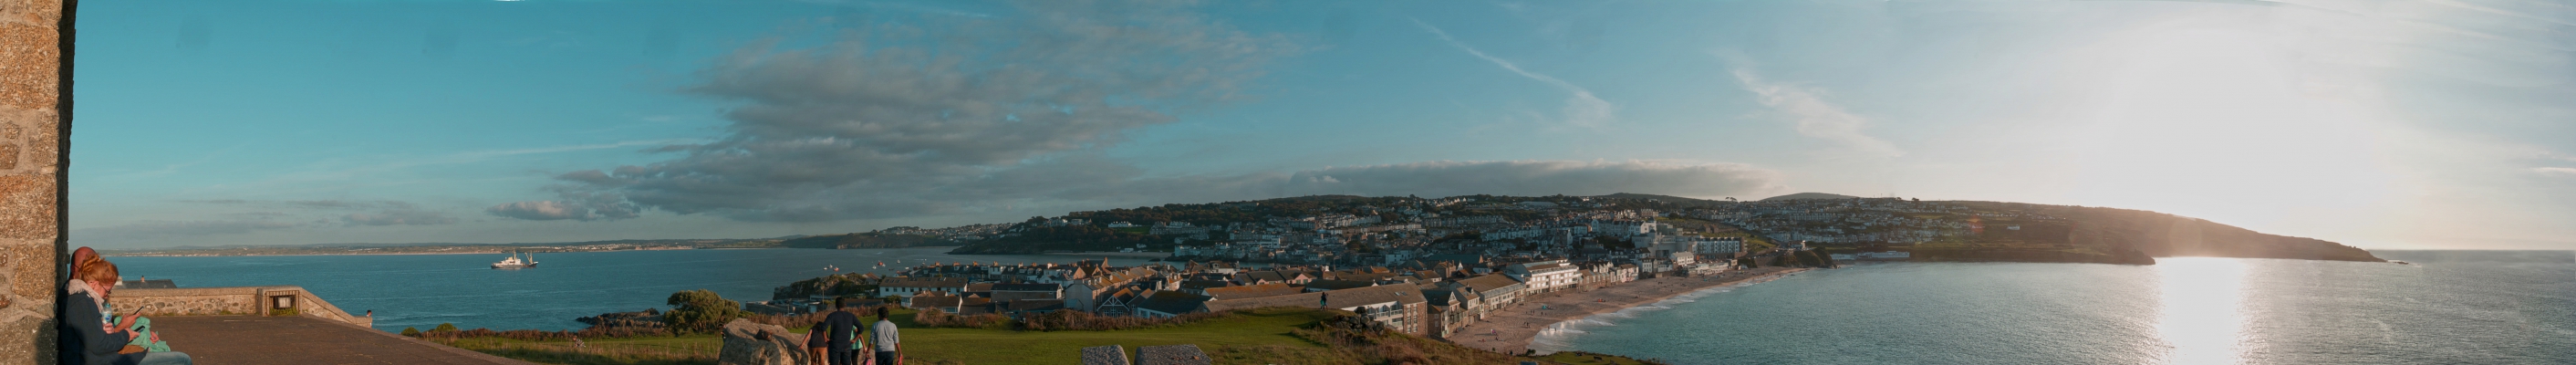 St Ives Panorama from the Island